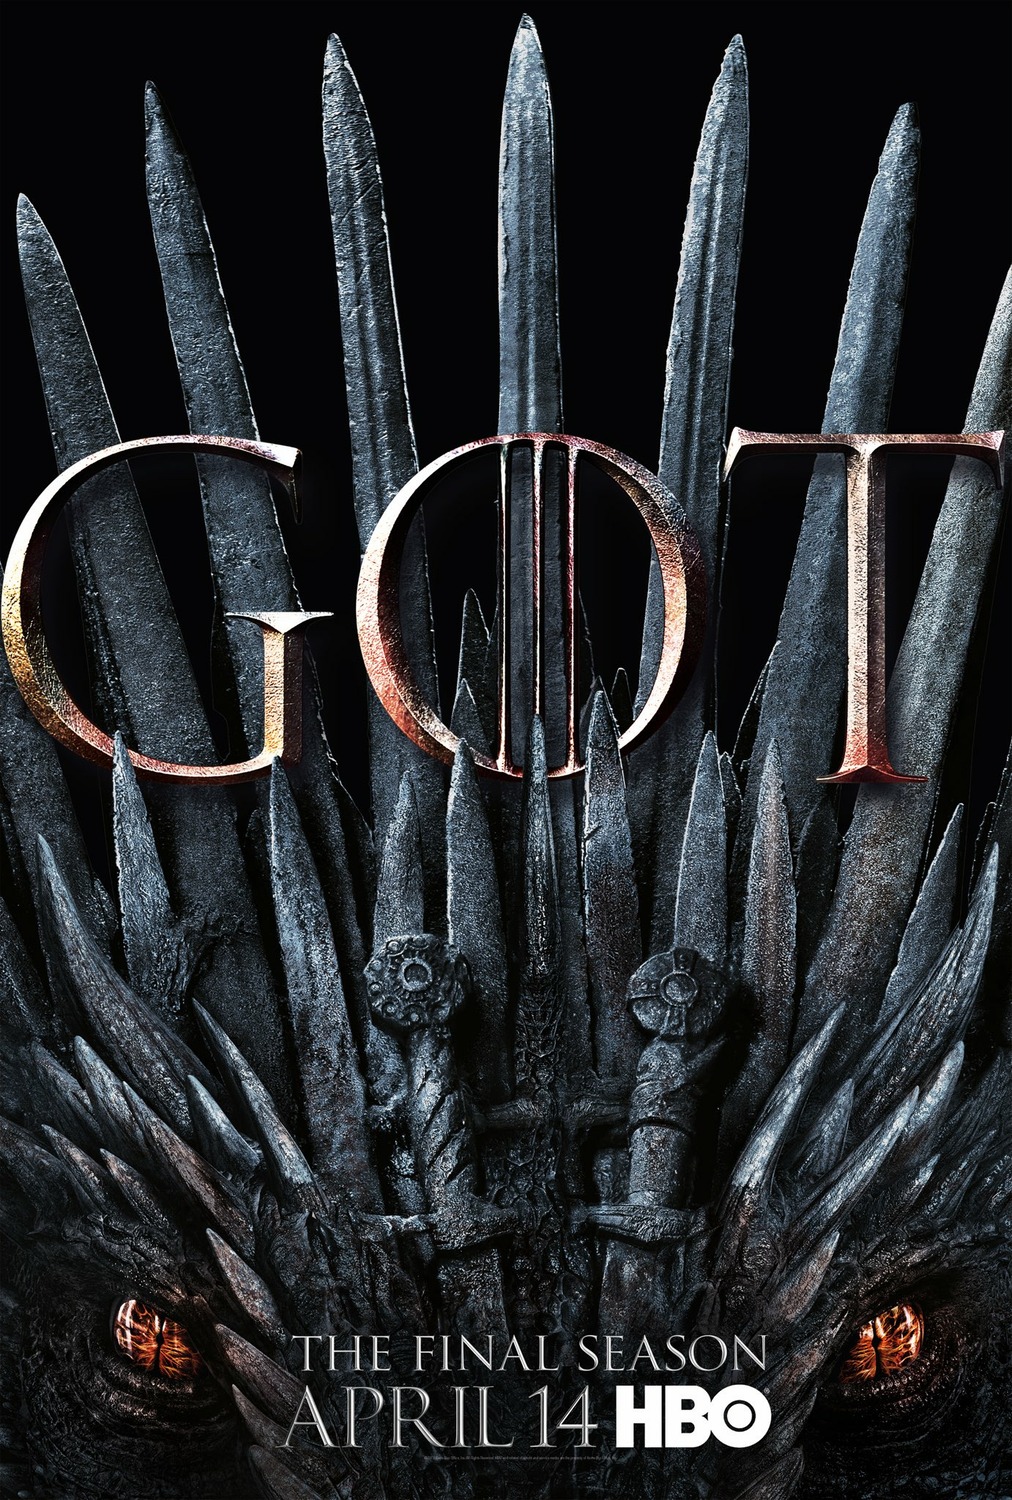 Extra Large TV Poster Image for Game of Thrones (#124 of 125)